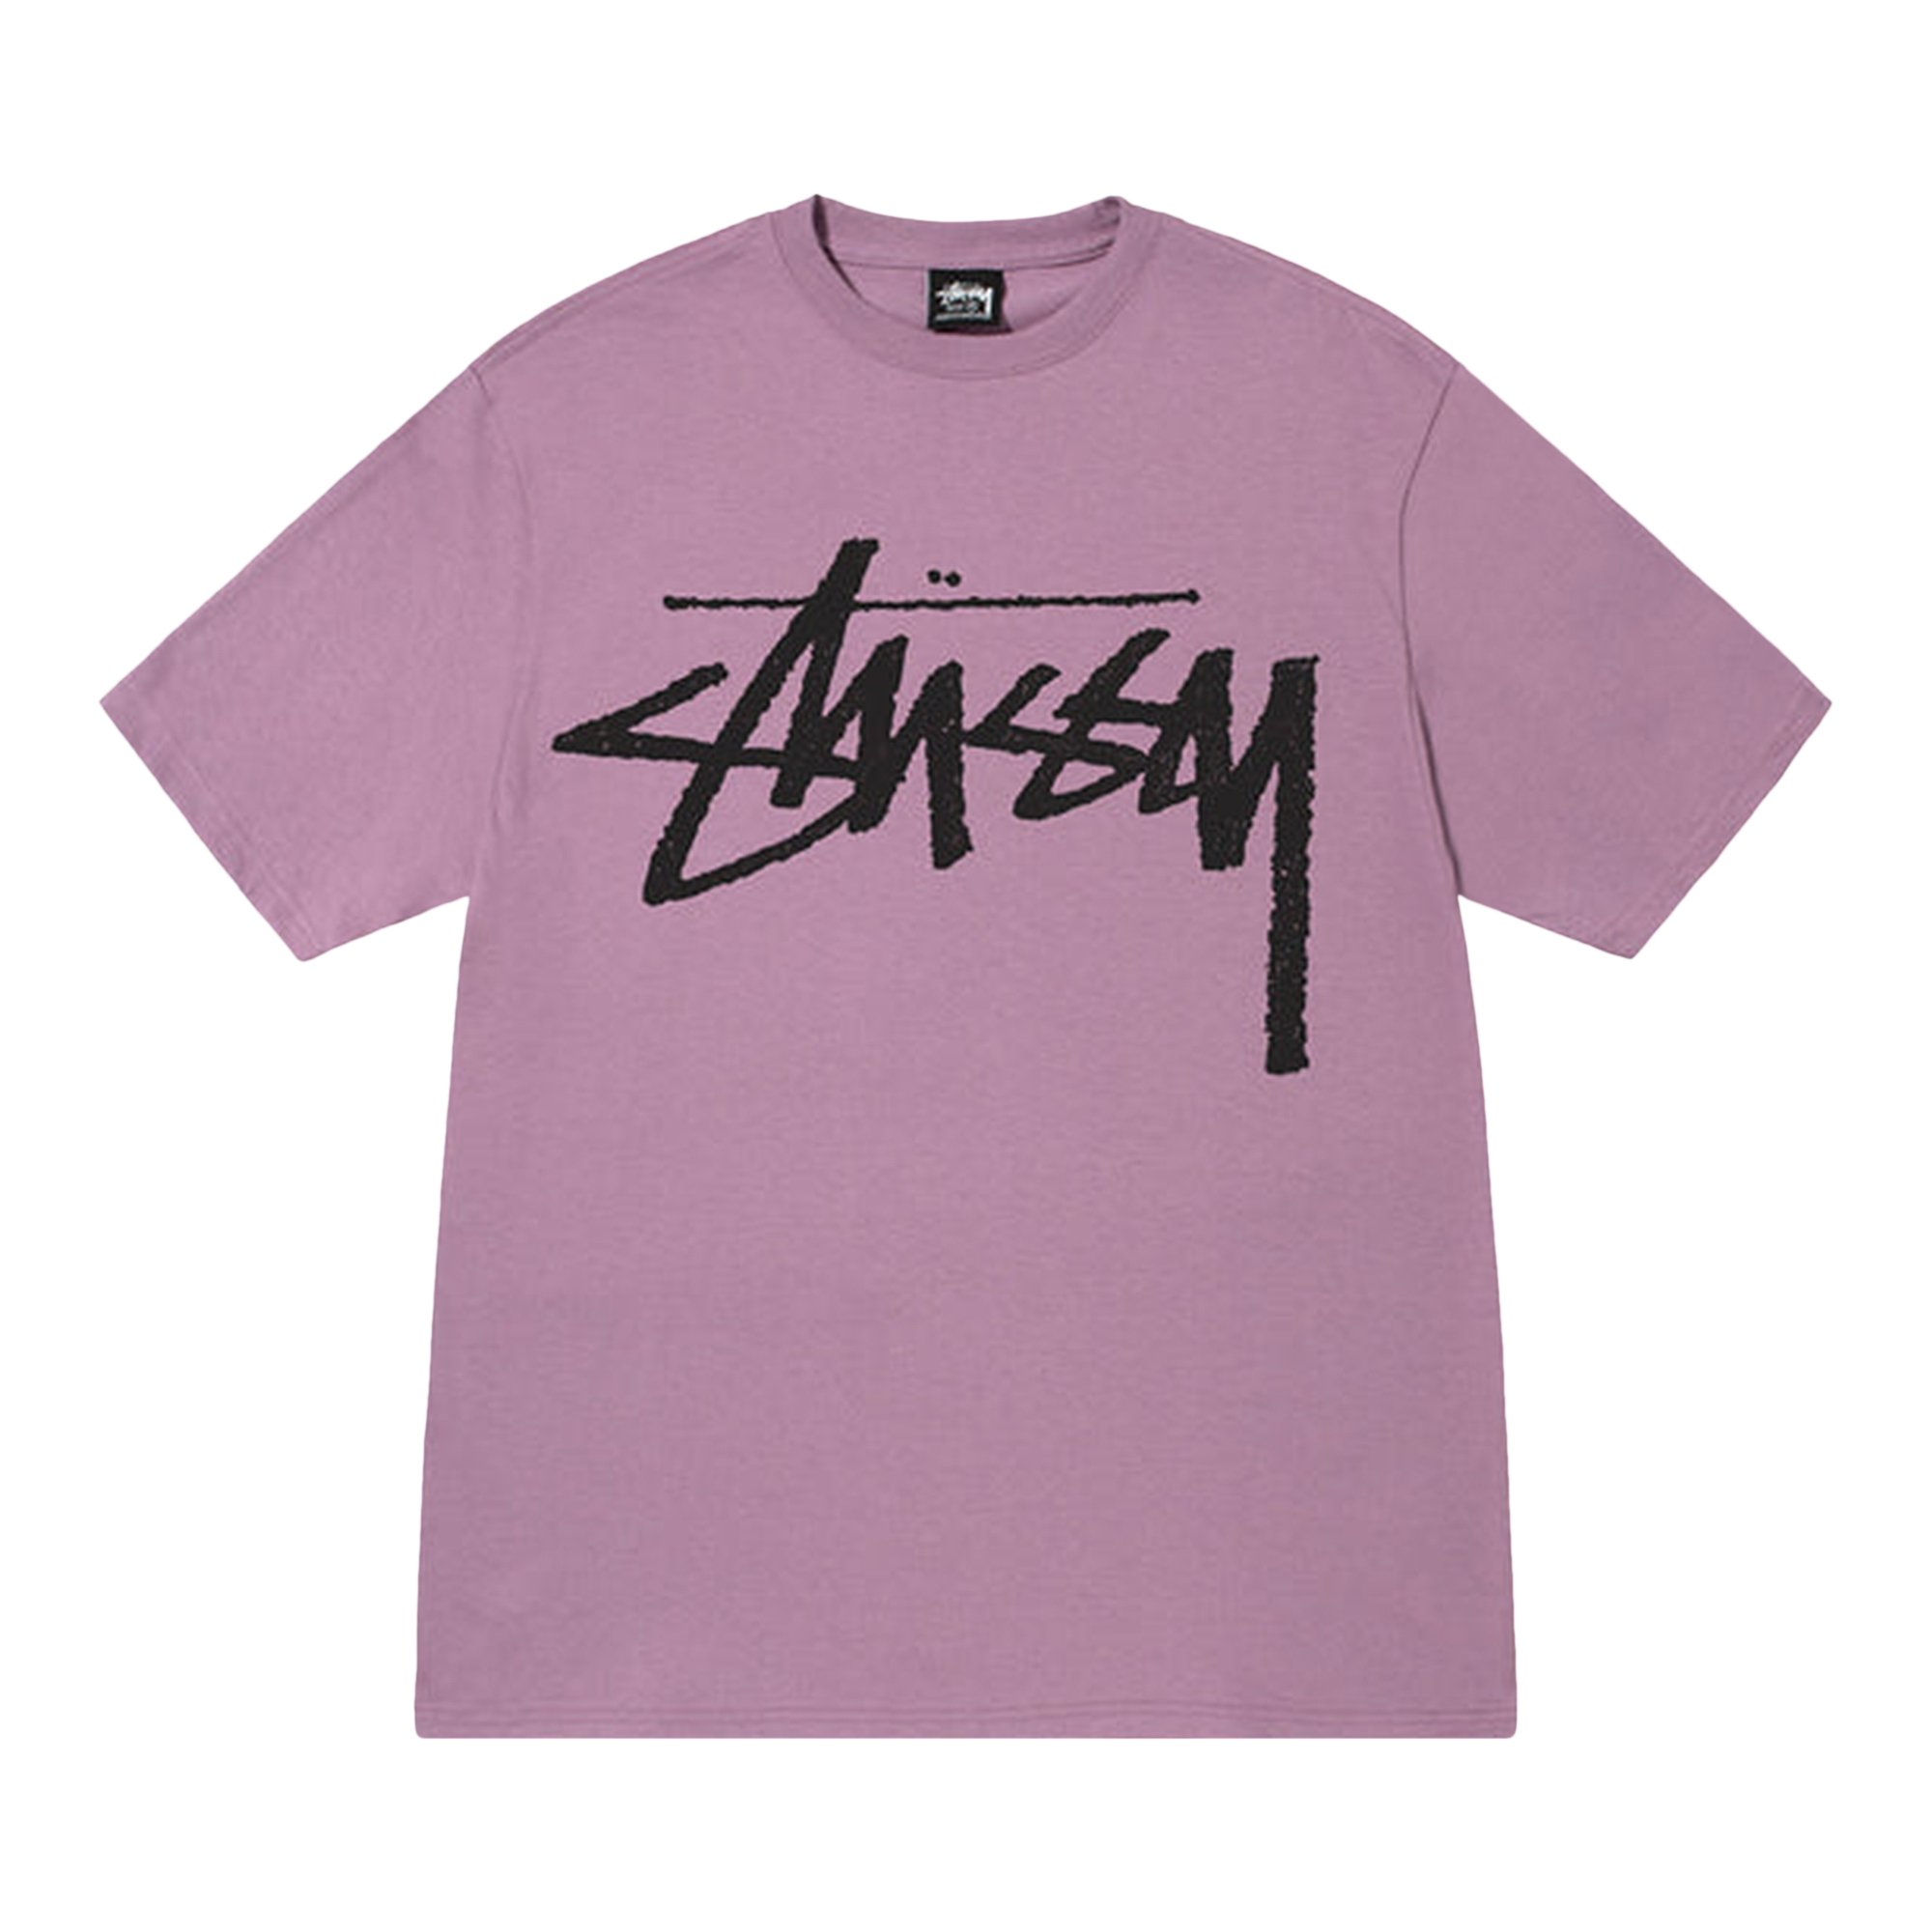 Buy Stussy Big Stock Tee 'Orchid' - 1904843 ORCH | GOAT